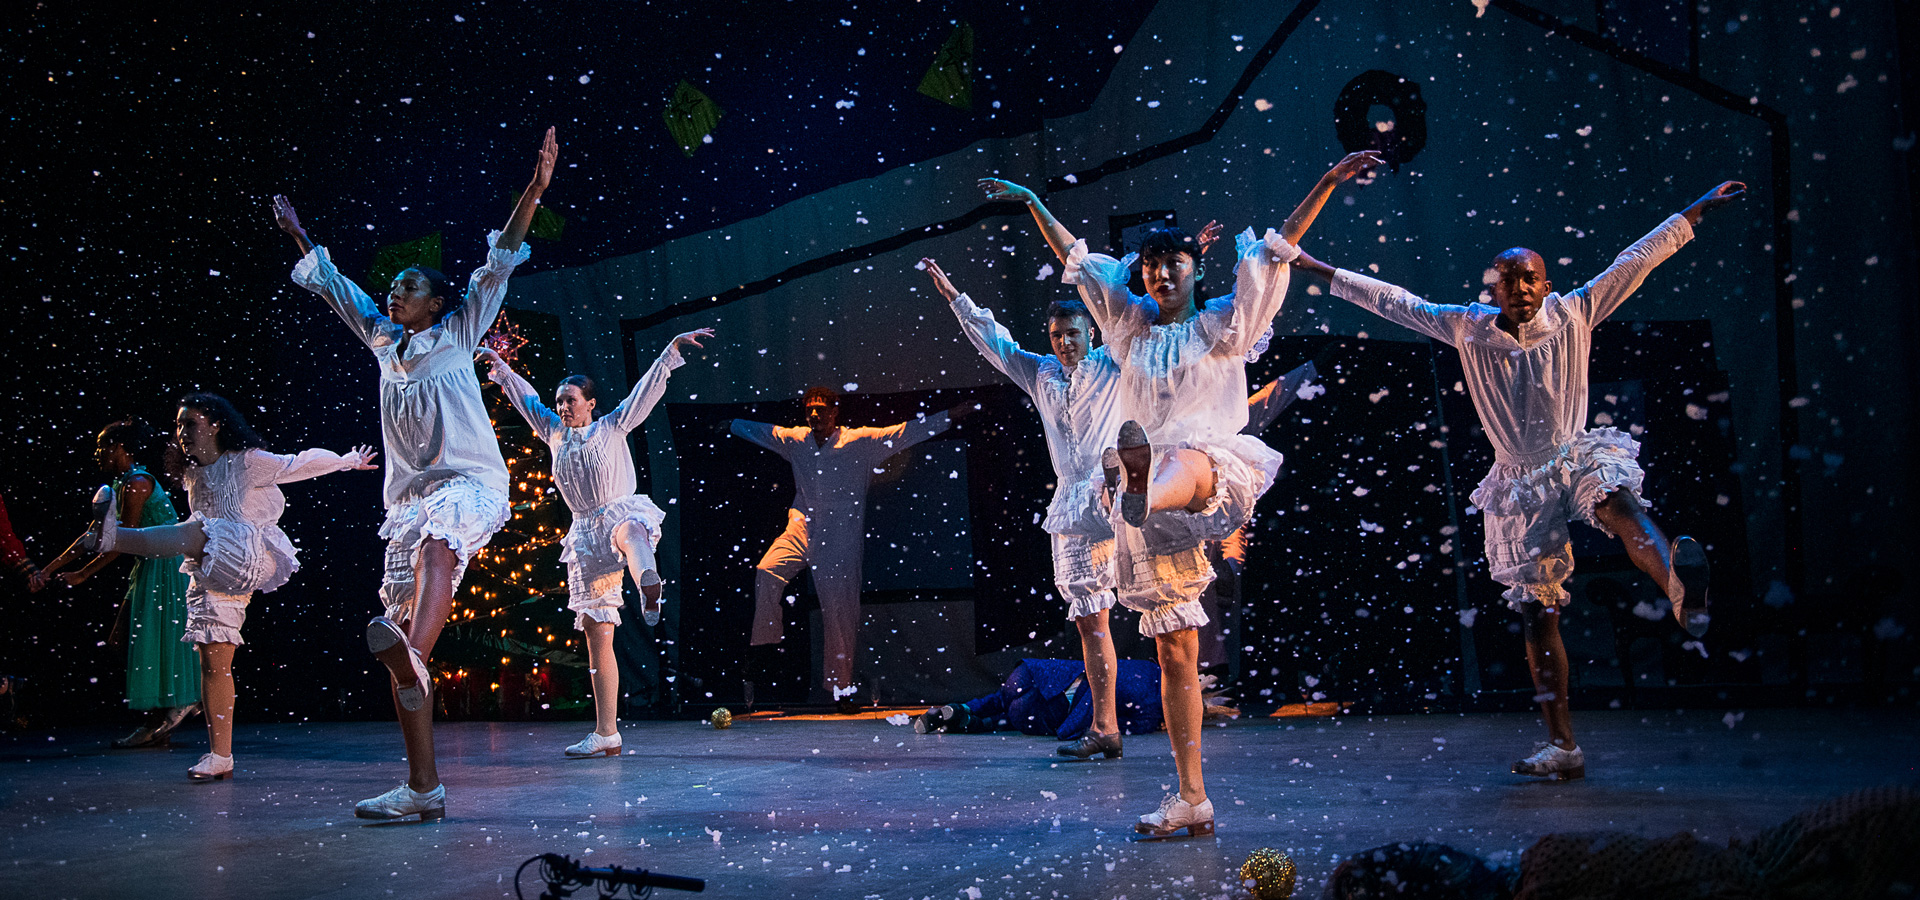 Dorrance Dance performers wear white costumes, and extend their arms upwards while snowflake-like specks rain down around them on the stage.